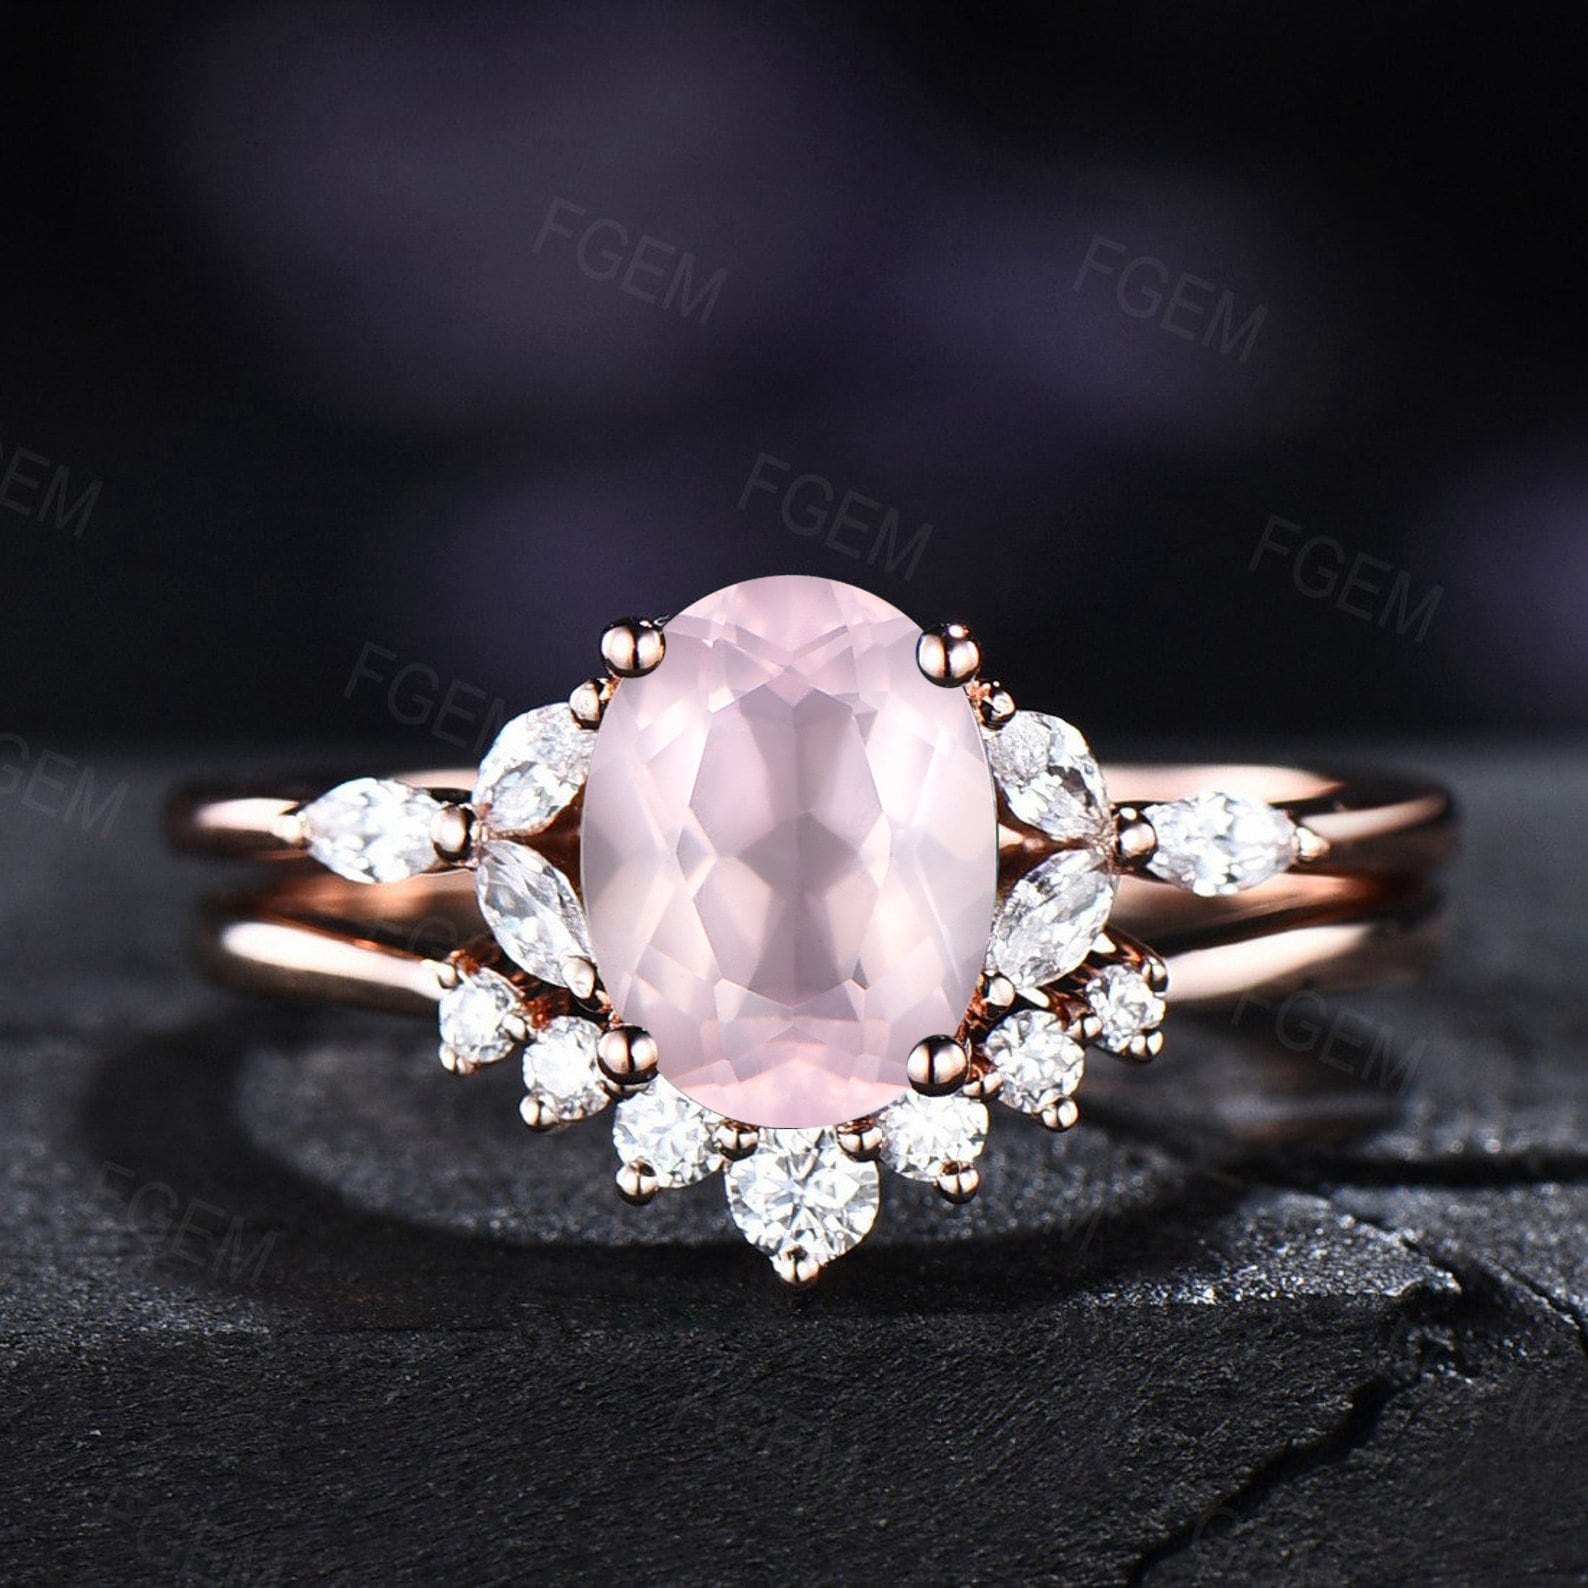 Amazon.com: Attractive Rose Quartz Ring, 925 Sterling Silver Ring Handmade Rose  Quartz Jewelry, Love Stone Ring, Pink Gemstone Ring, Gift For Girlfriend,  Cute Elegant Ring, Oval Shape Ring For Women By NKG :